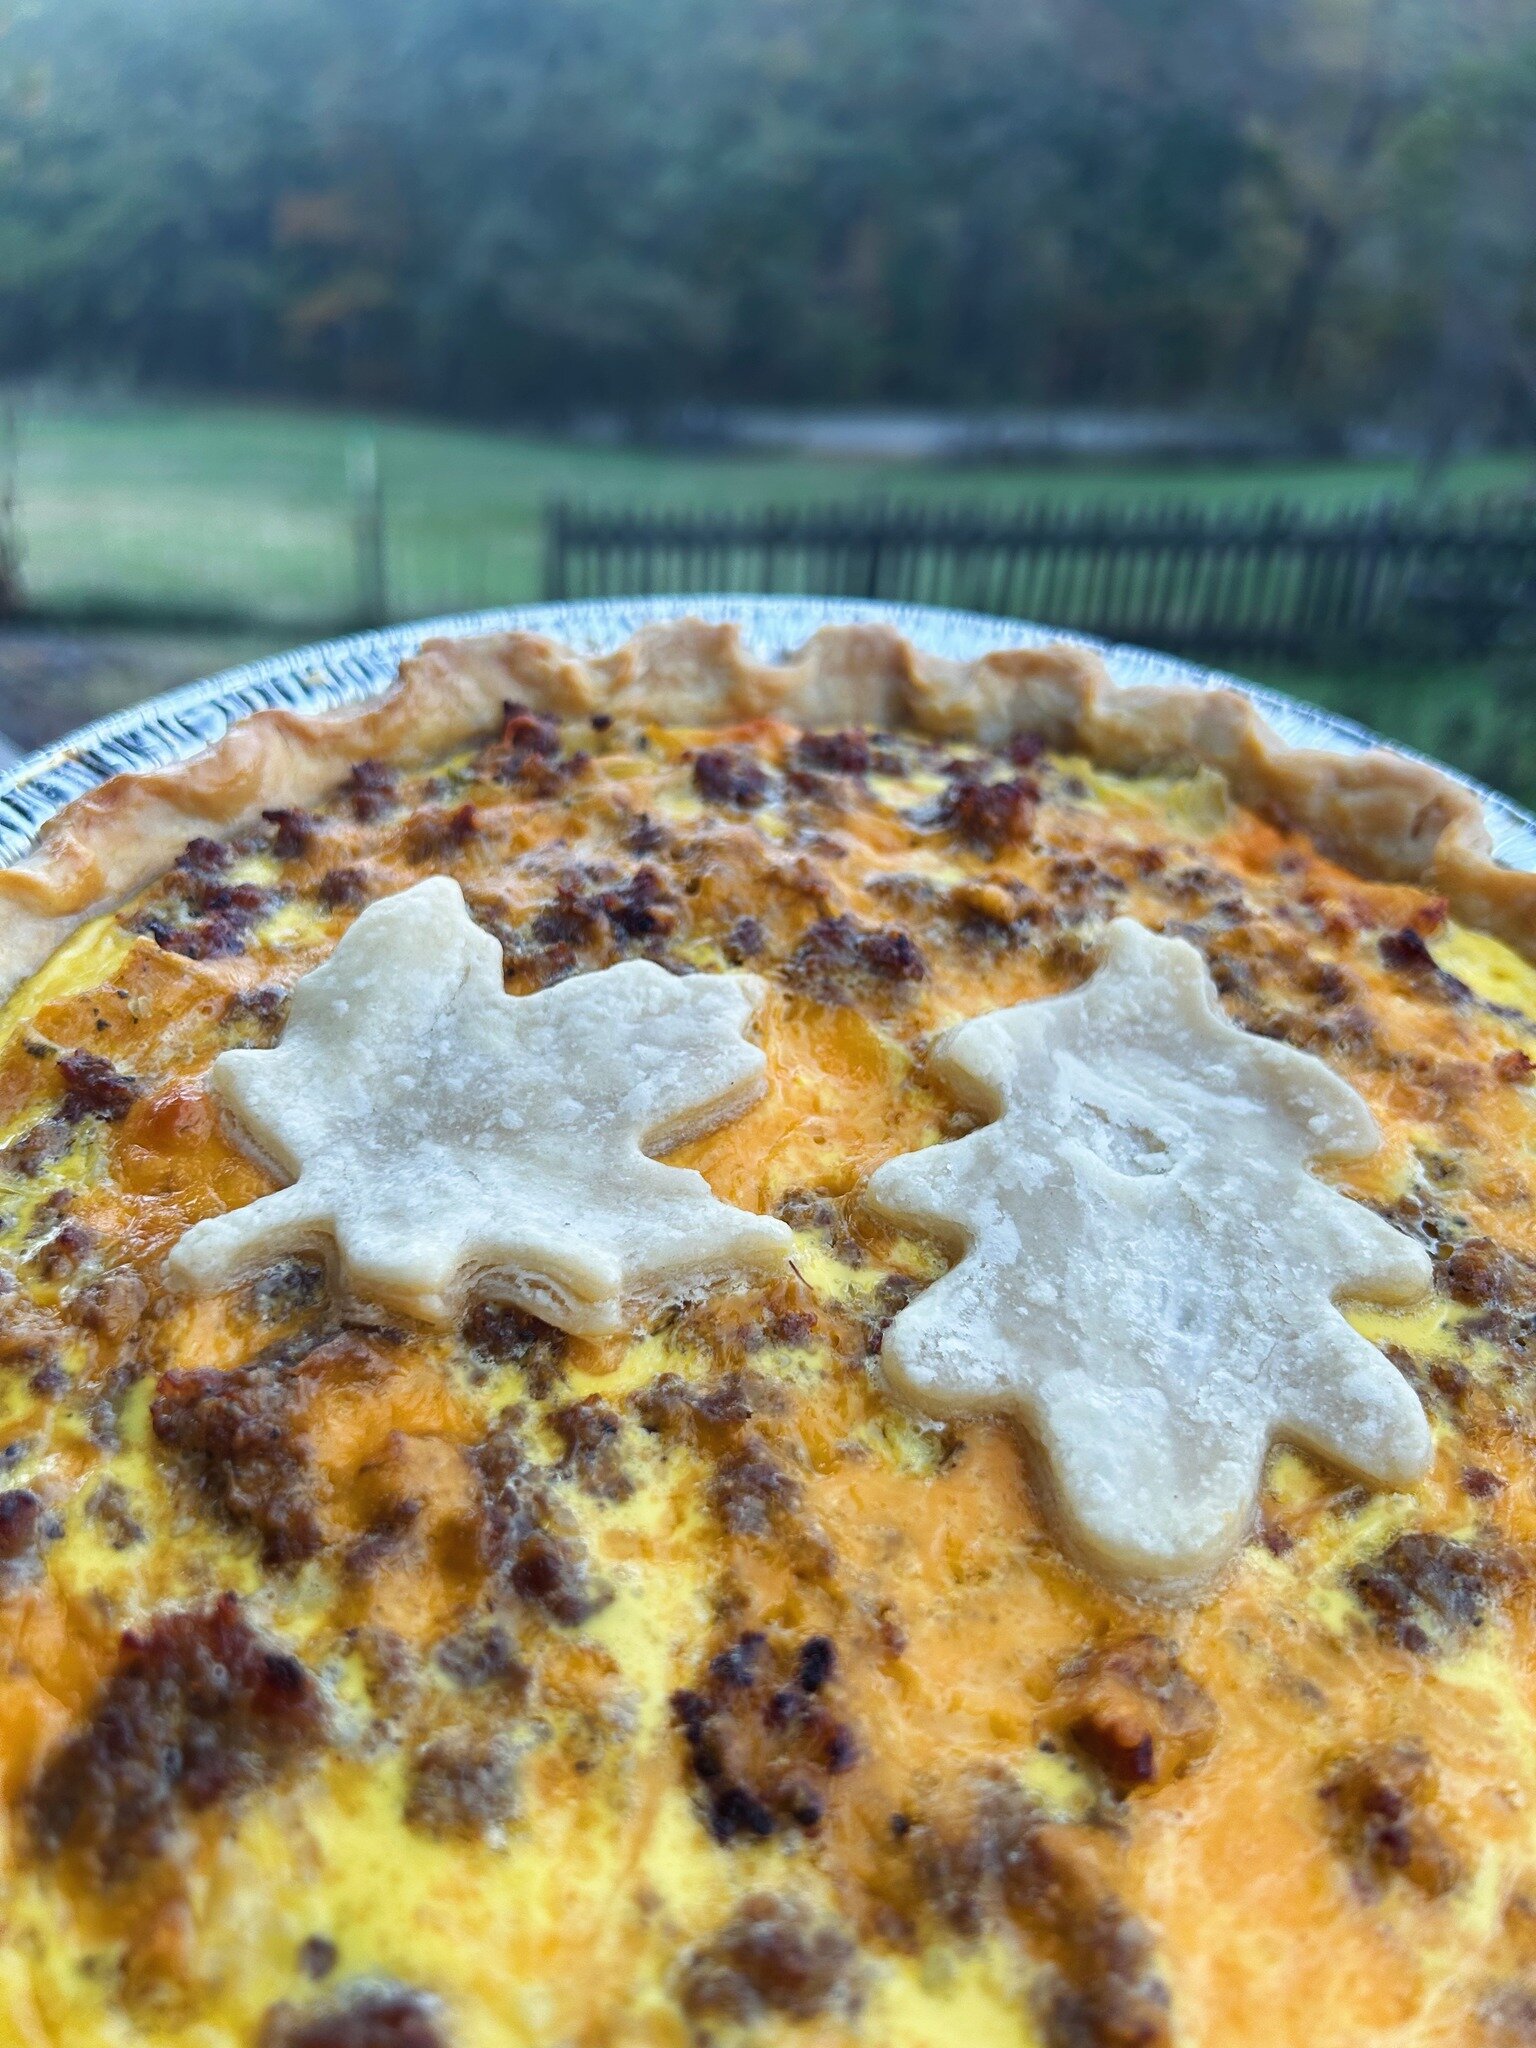 🍂Take home an autumn quiche, pop it in the oven and watch those leaves turn golden brown. 
🍂Our autumn quiche is made with local butternut, sausage, leeks and sharp cheddar. ($29 per quiche) 
🍂We'll be in the Wooden Spoon Mobile this Saturday from